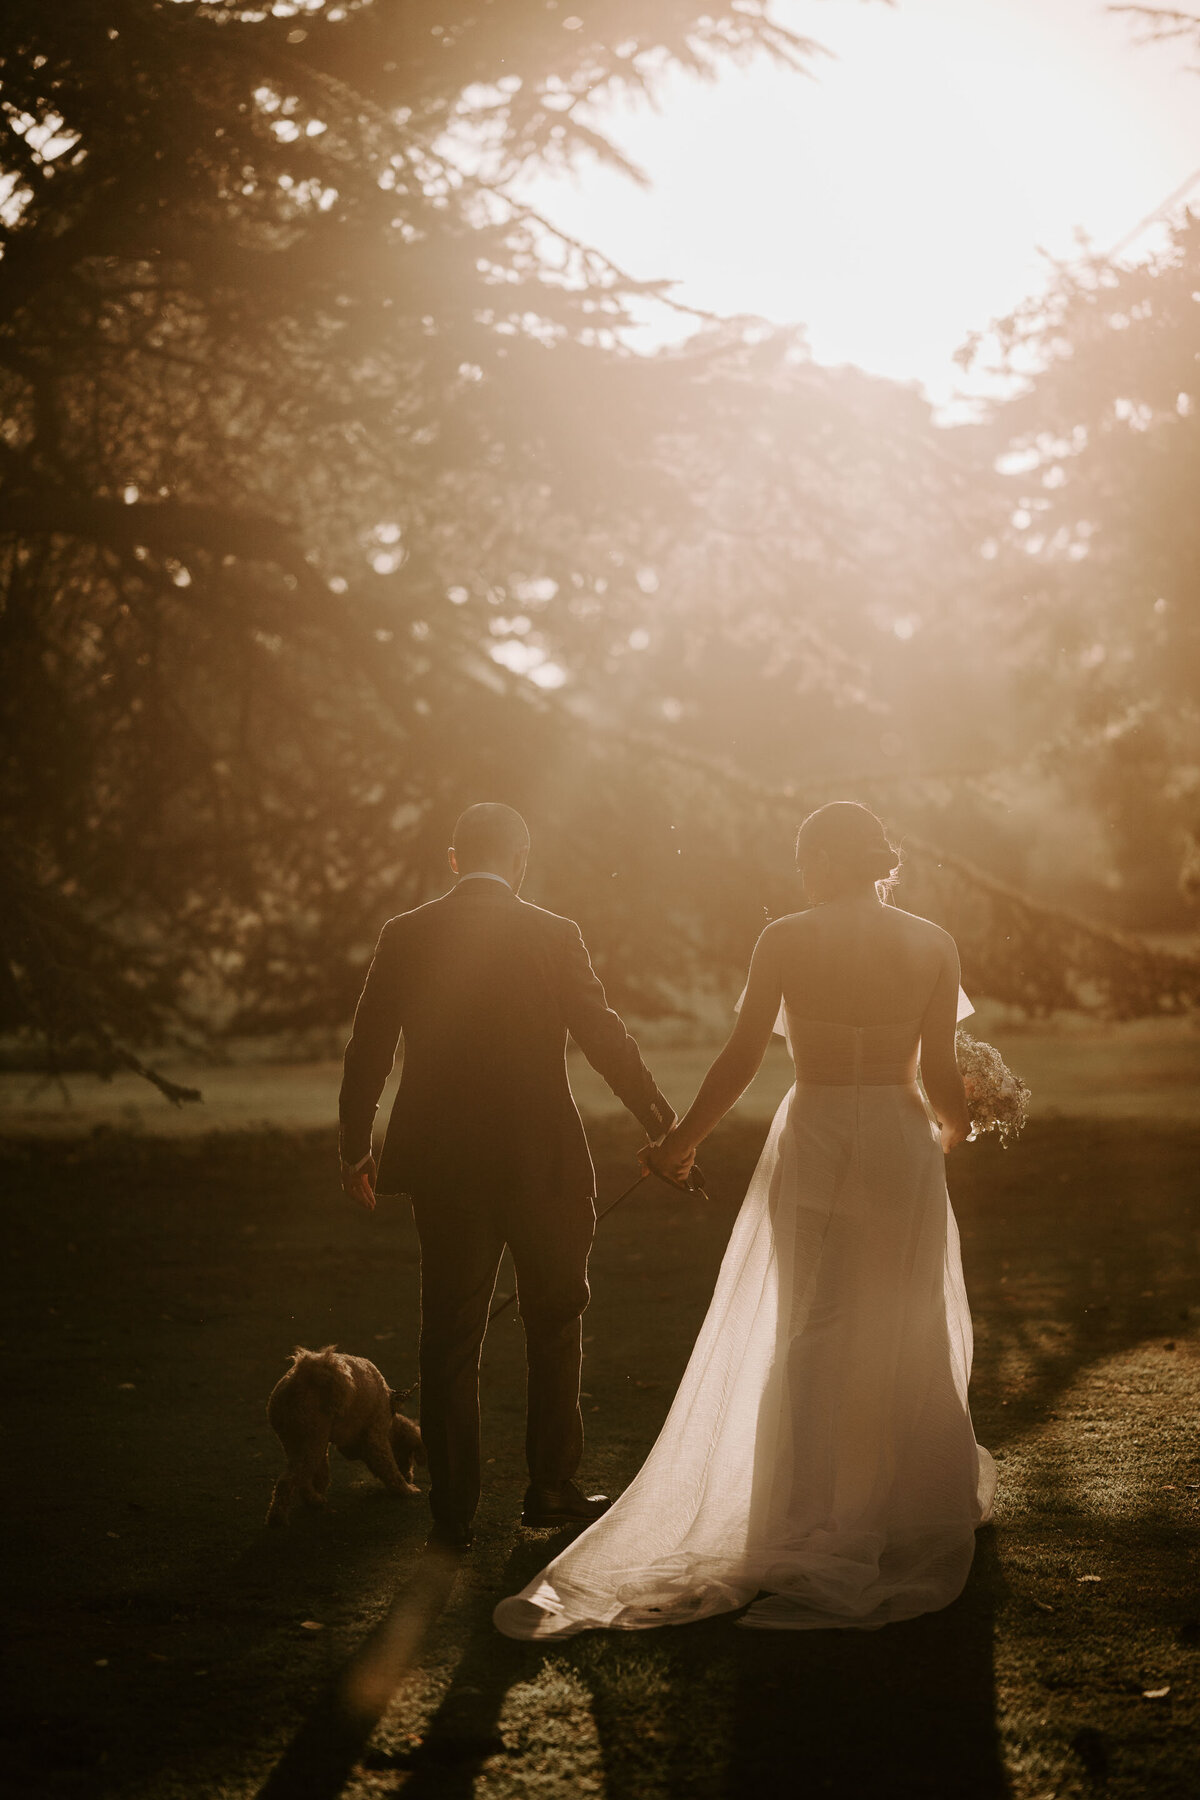 aswarby-rectory-wedding-photographer-linsey-james-laura-williams-photography28